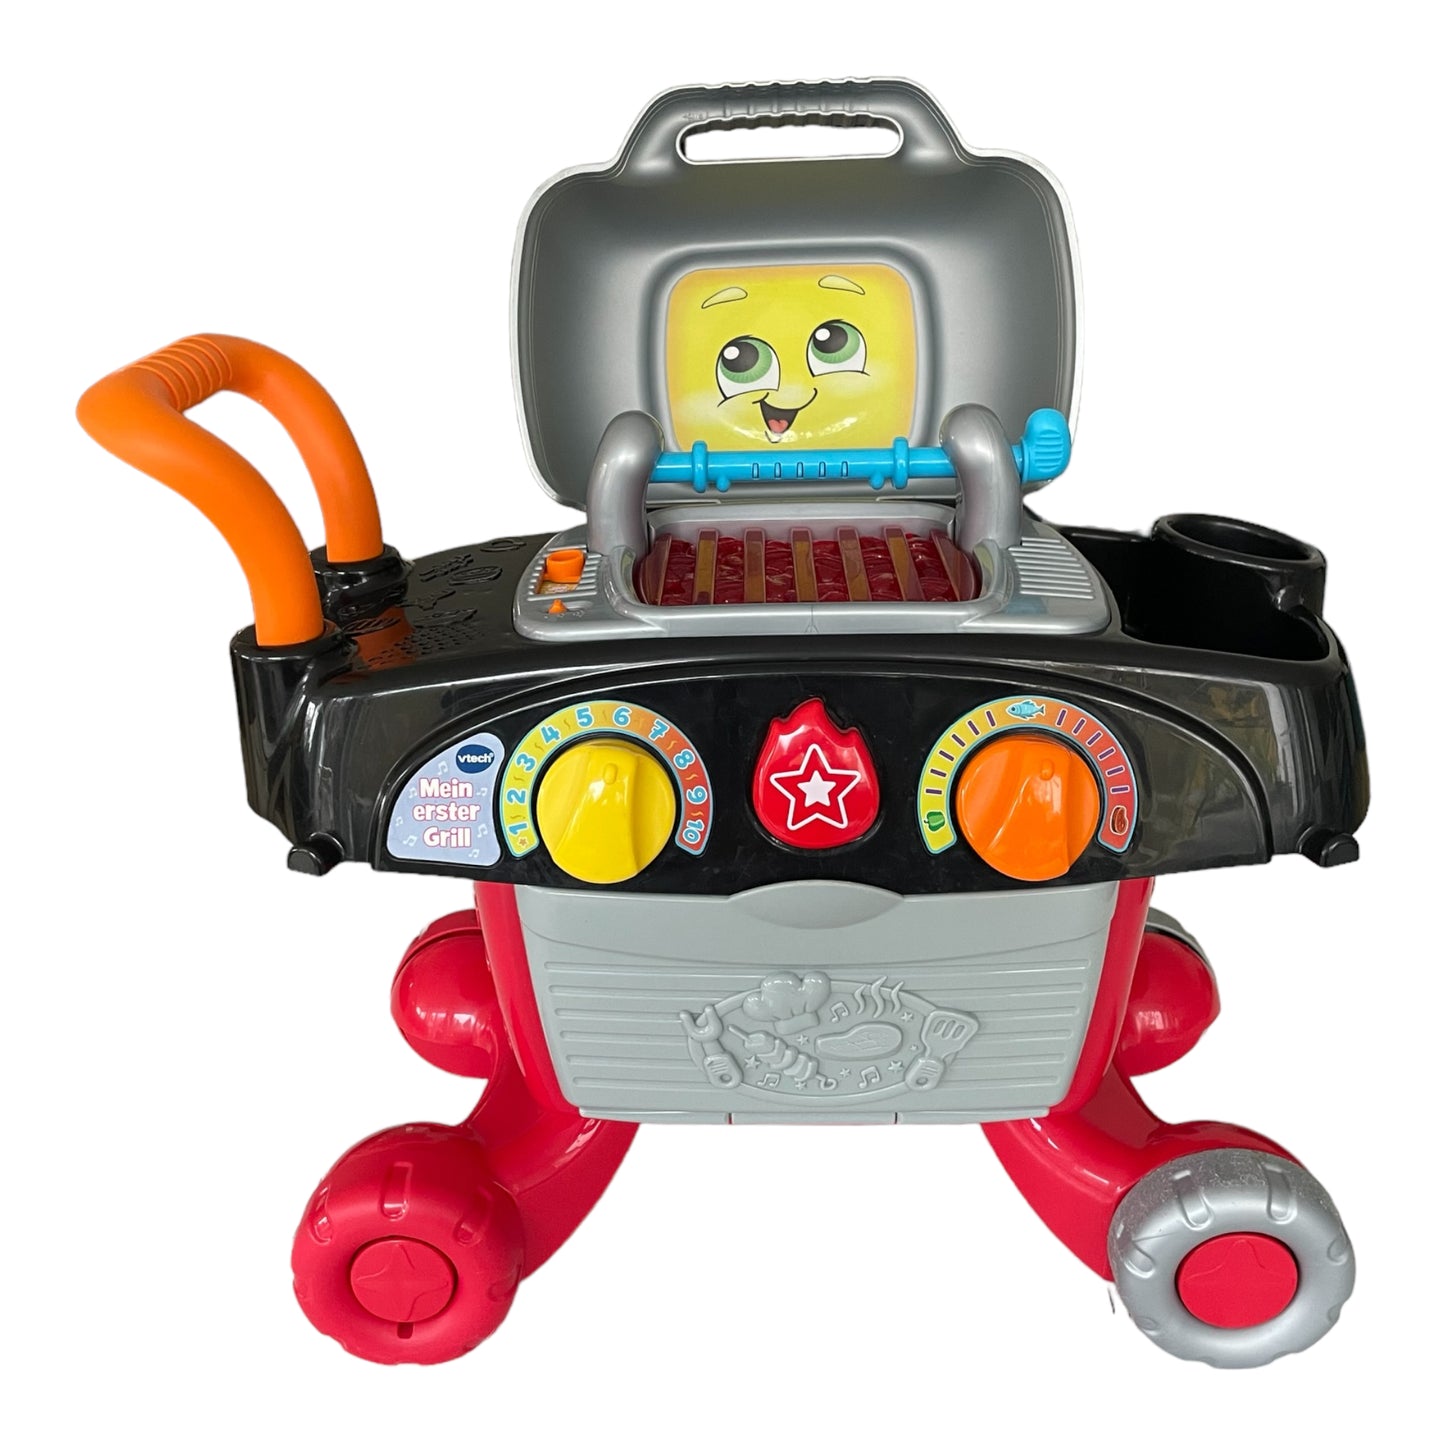 VTech Gril & Empty Barbeque